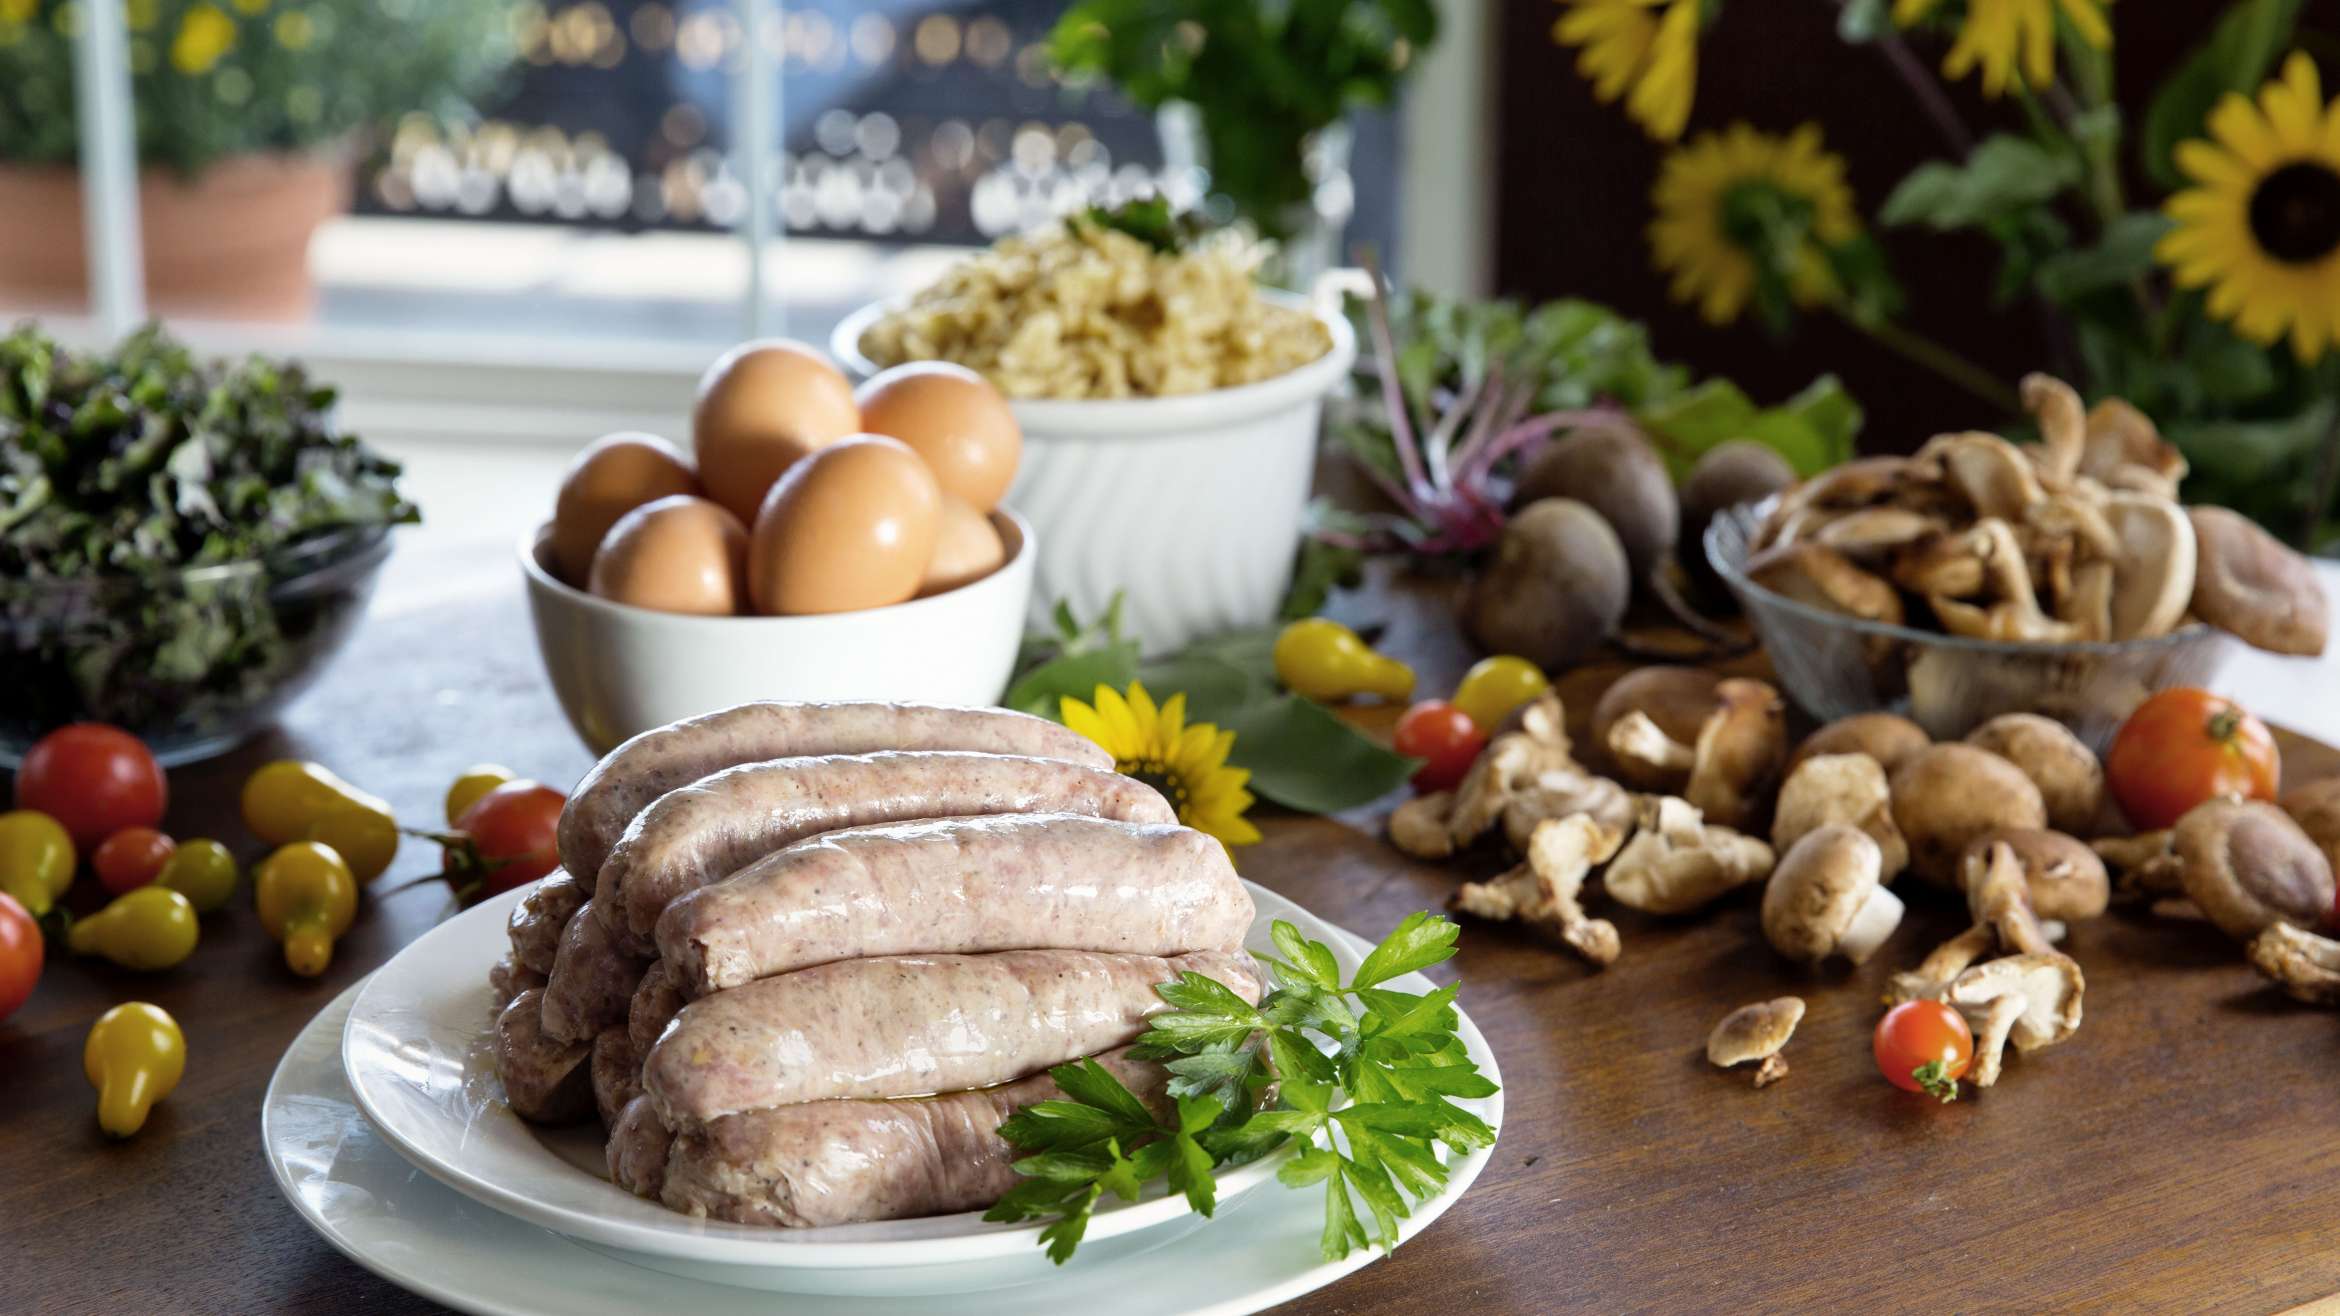 Plate with a stack of sausage on a wooden table with a bowl of eggs behind them and vegetables scattered around them